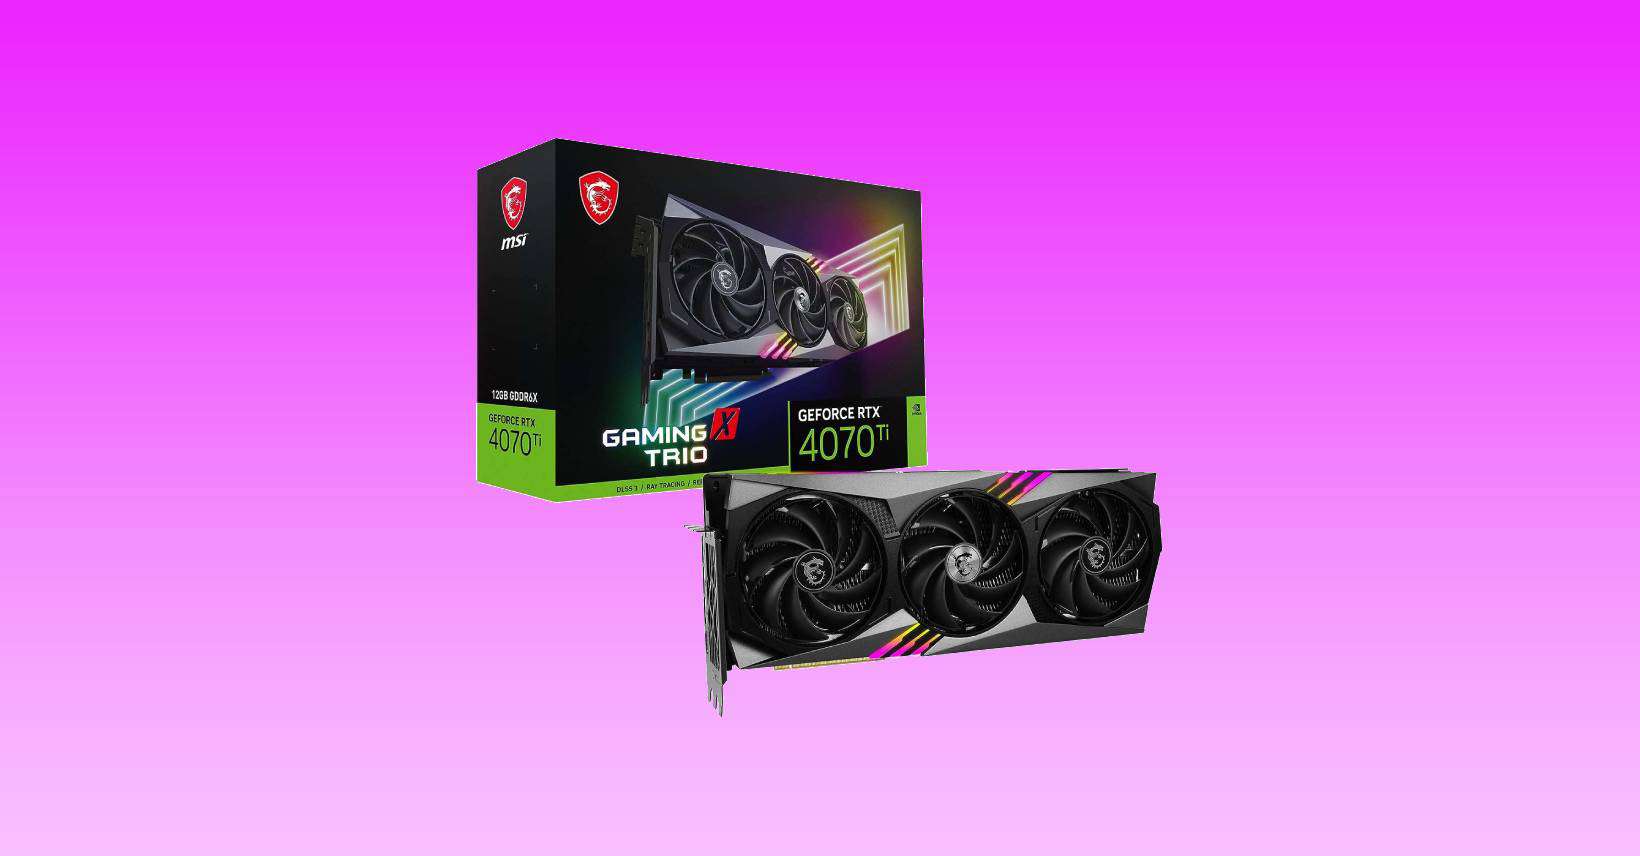 This powerhouse MSI RTX 4070 Ti just received a welcome price drop – Best GPU deals